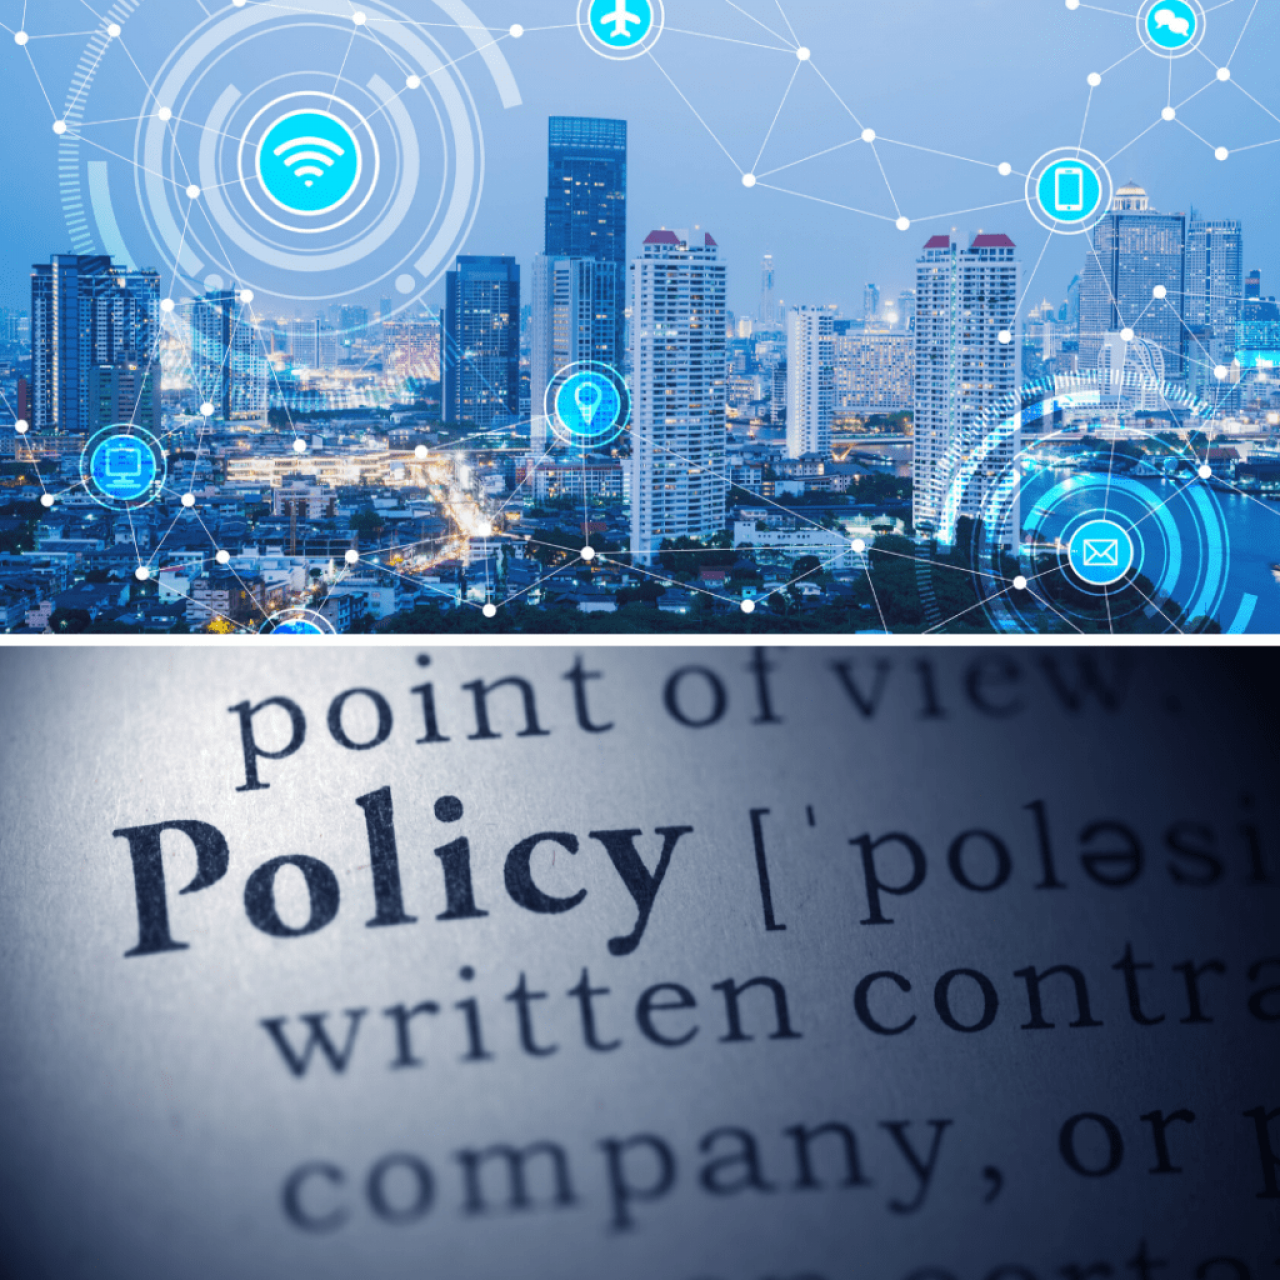 A picture of a city skyline with light blue image bubbles that contain different science and tech symbols in the top half. The bottom half is a picture of the word "Policy" in a dictionary. 